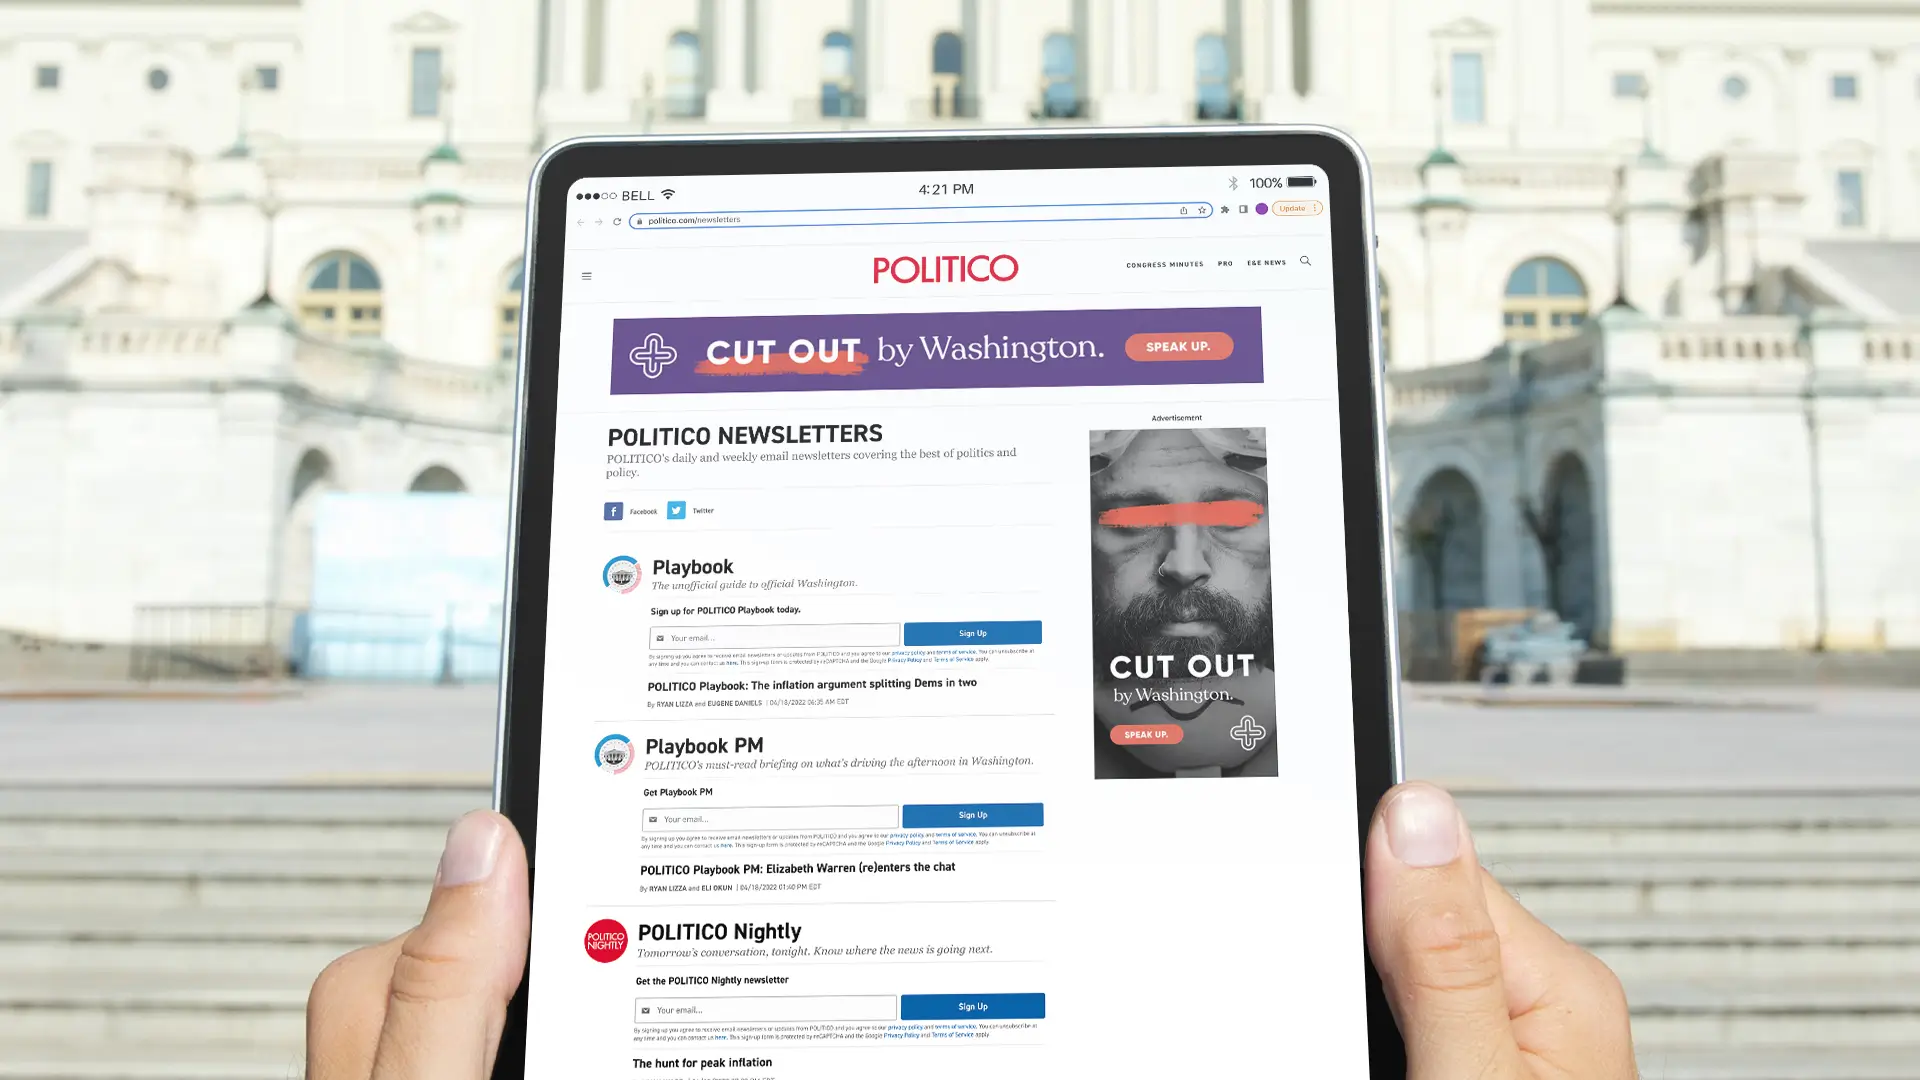 A person holds a tablet displaying the POLITICO website, showcasing newsletters like Playbook, Playbook PM, and POLITICO Nightly. The background includes blurred architecture, suggesting an outdoor location in front of a significant building—perfect for those engaged in rapid-response campaigns or health care advocacy.